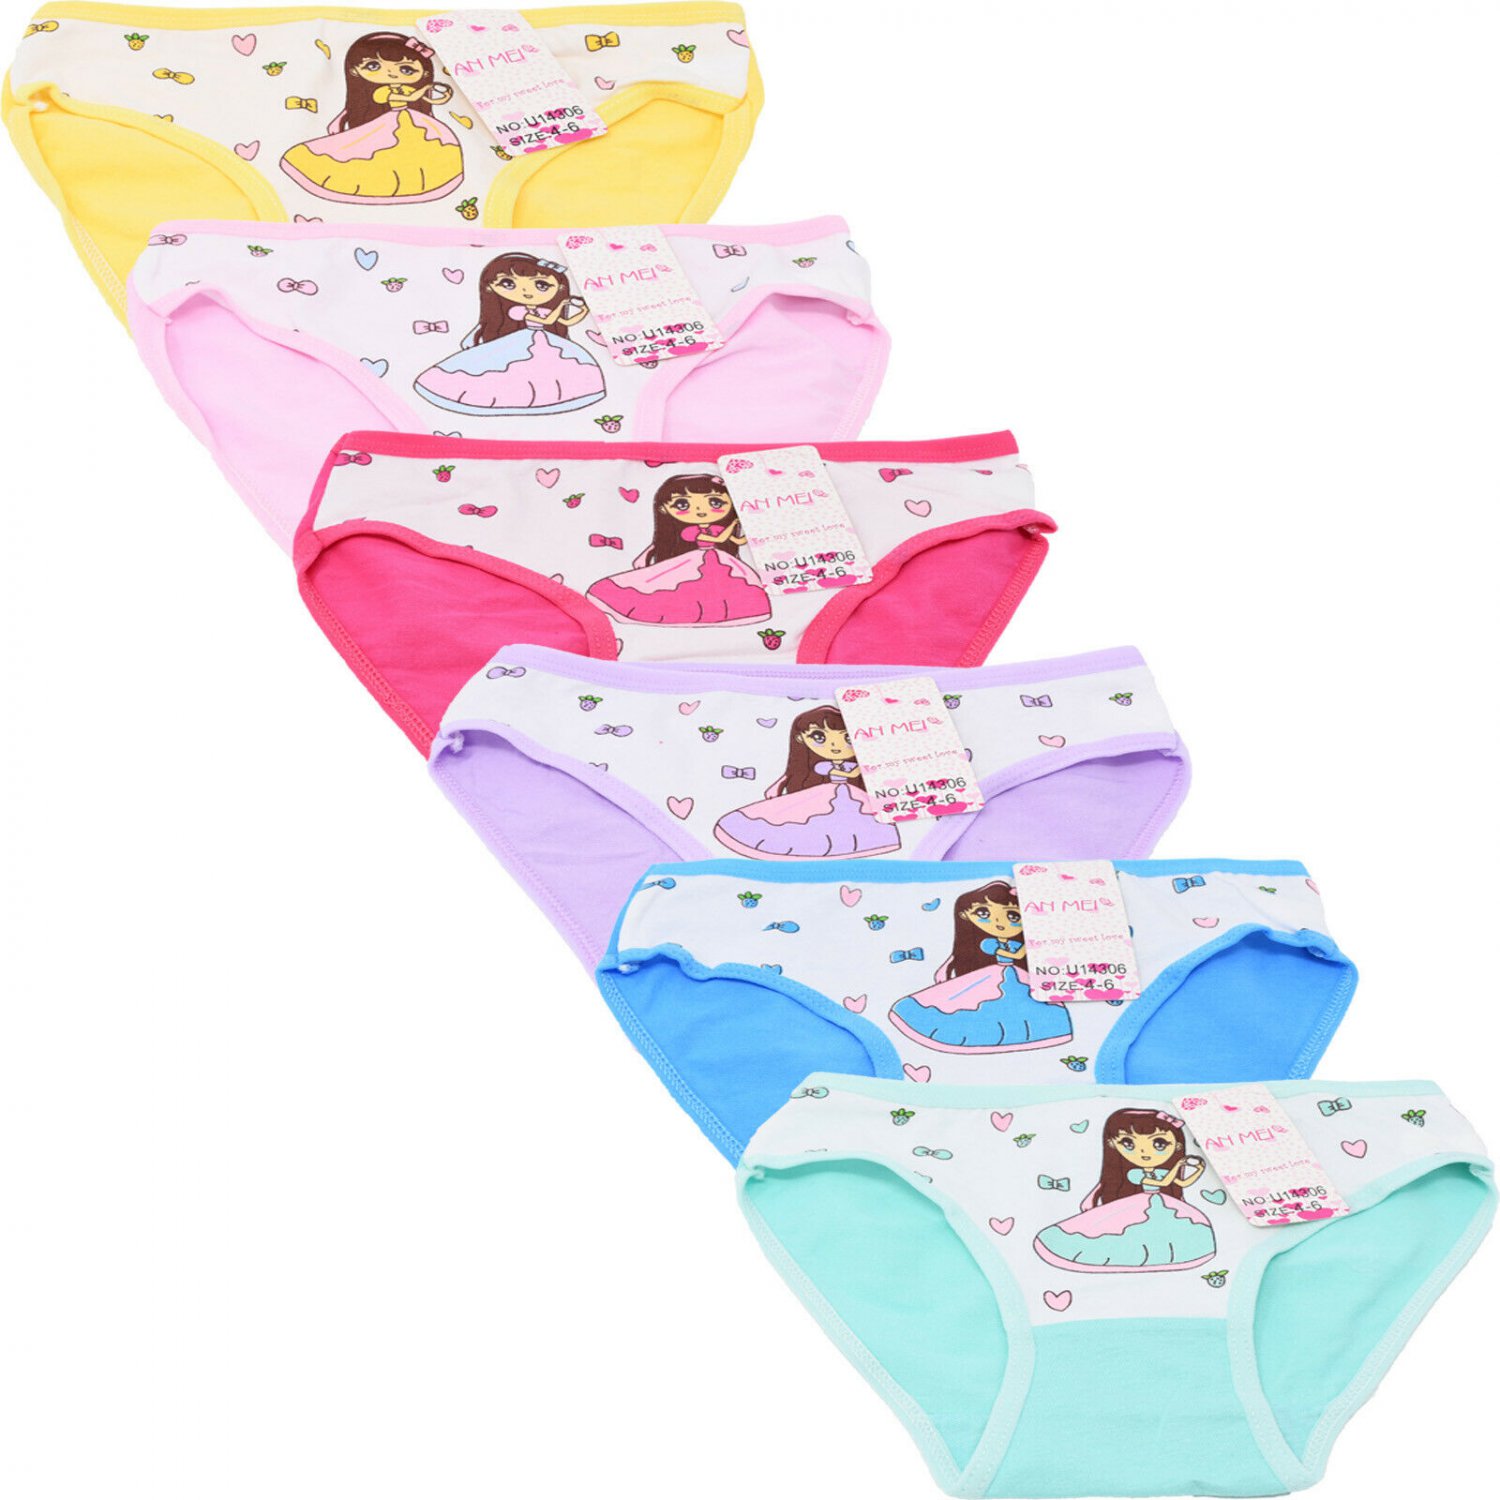 6 Pc Girl S Underwear Princess Style 3 To Choose From Ages 2 8